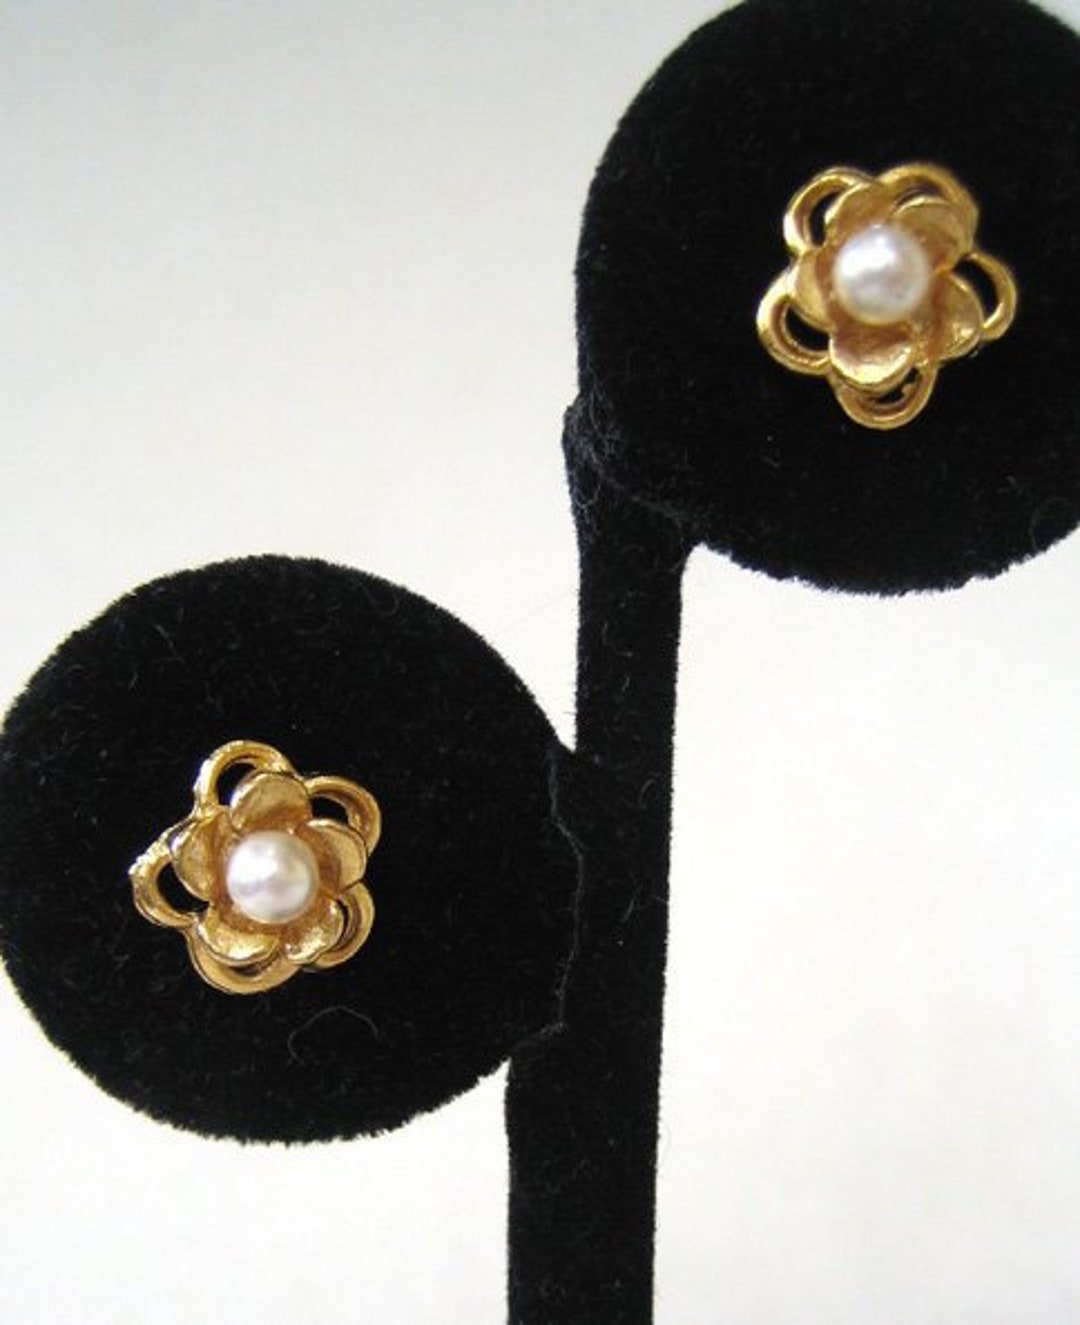 Circa 1970s Gold Tone Faux Pearl Floral Earrings 